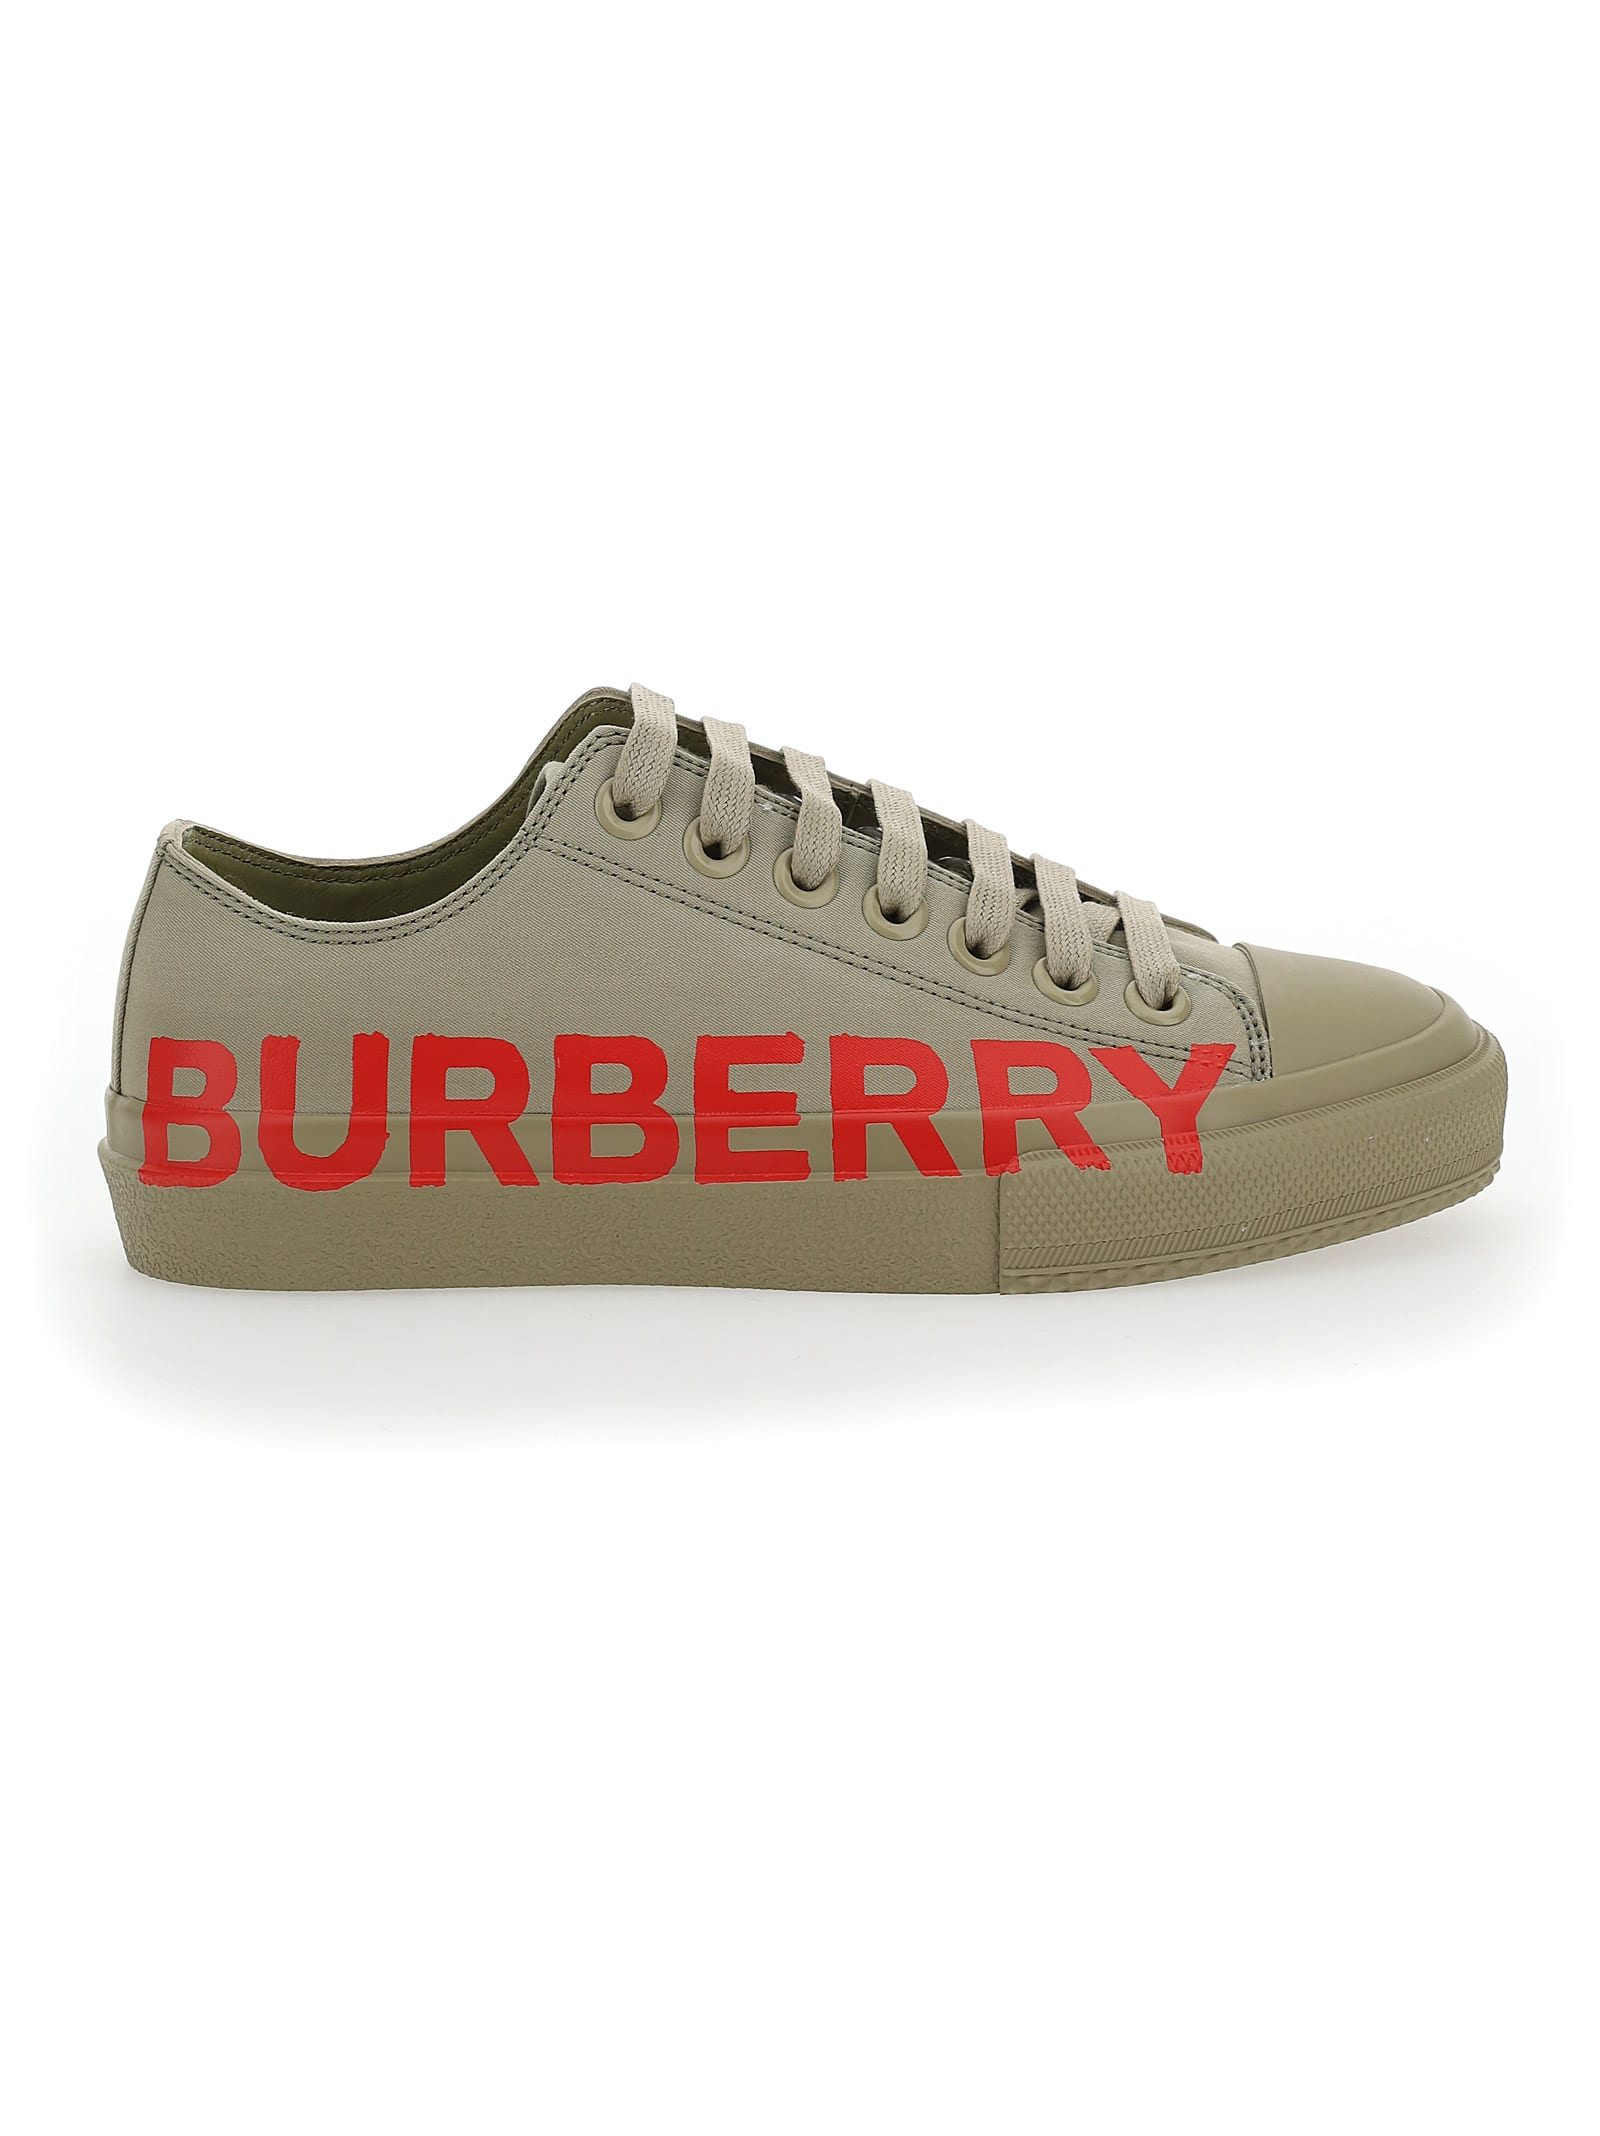 Image of Burberry